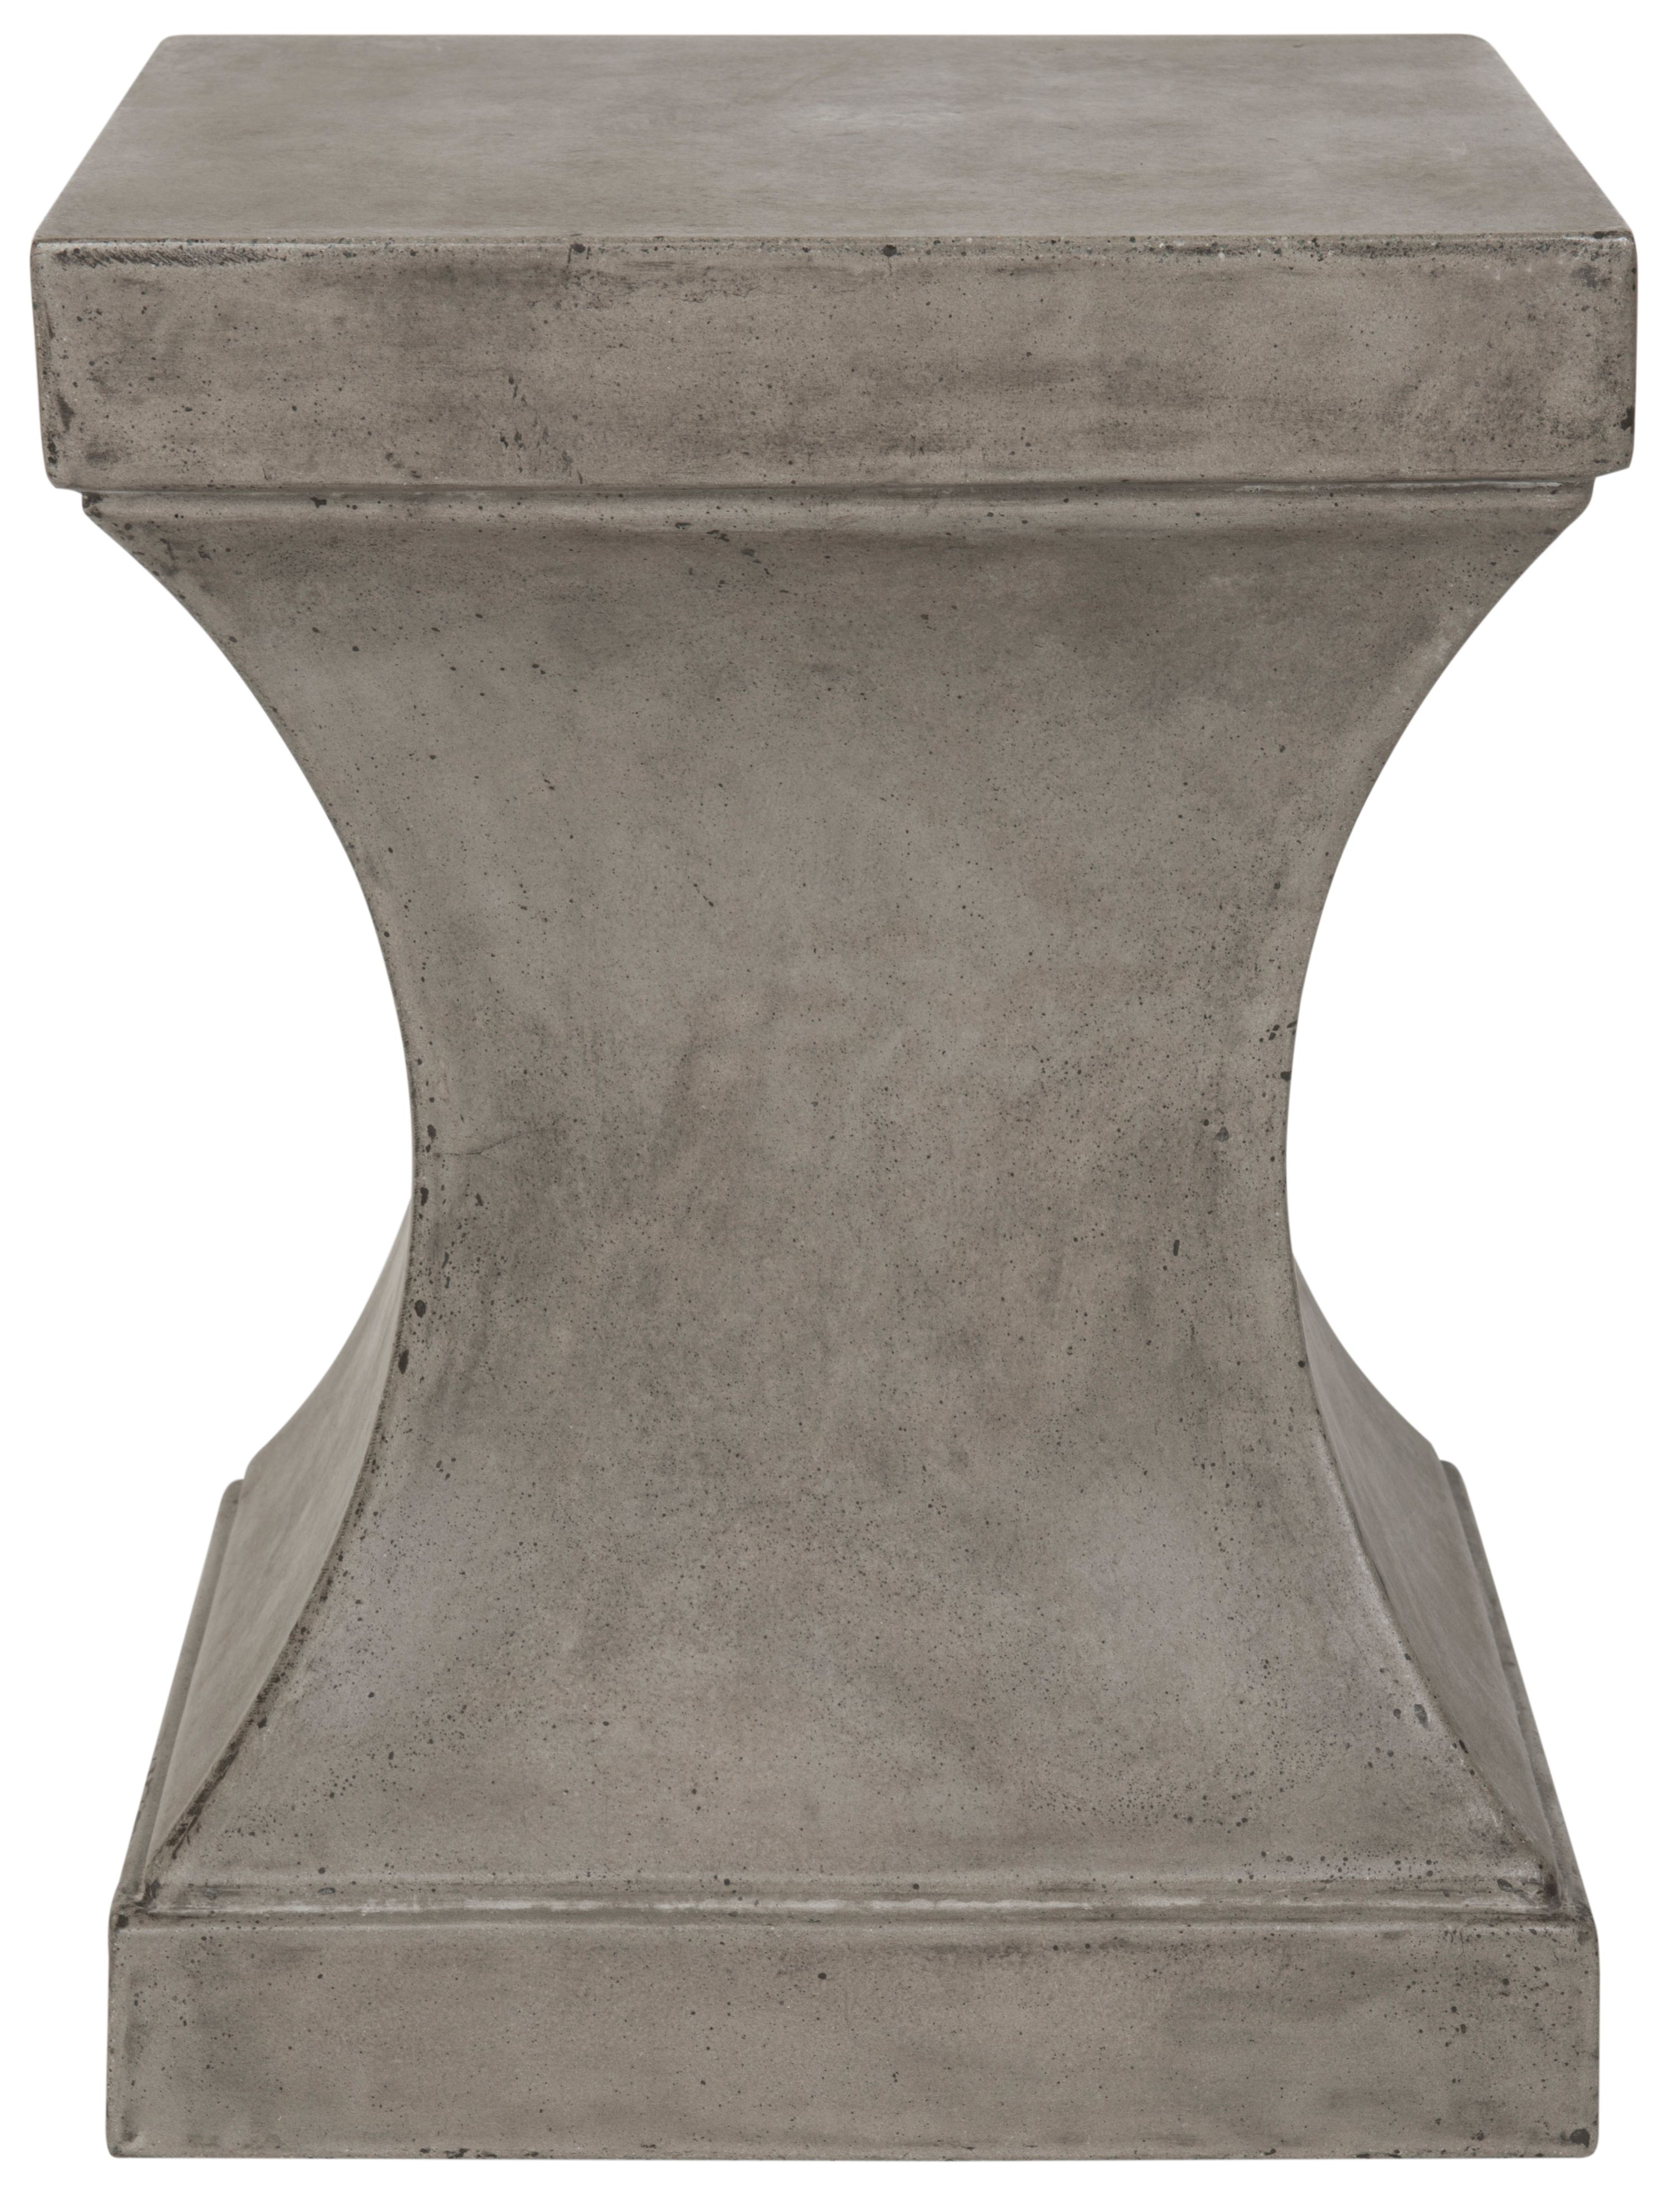 Safavieh Curby Outdoor Modern Concrete Accent Table - Dark Grey - image 4 of 5